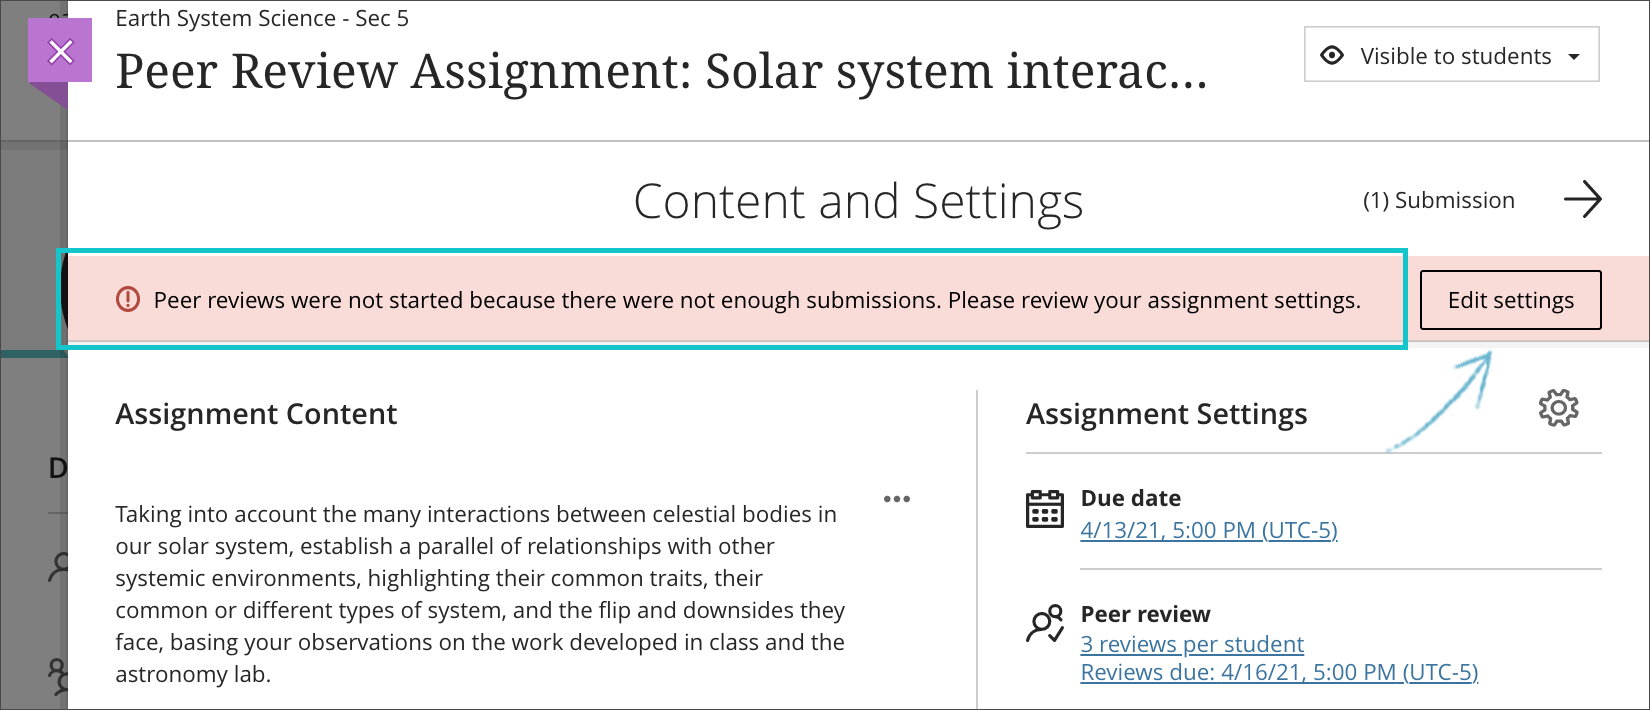 An assignment's Content and Settings page is open with 1) the "Peer reviews were not started because there were not enough submissions. Please review your assignment settings" message highlighted and 2) the "Edit settings" option selected and highlighted.  